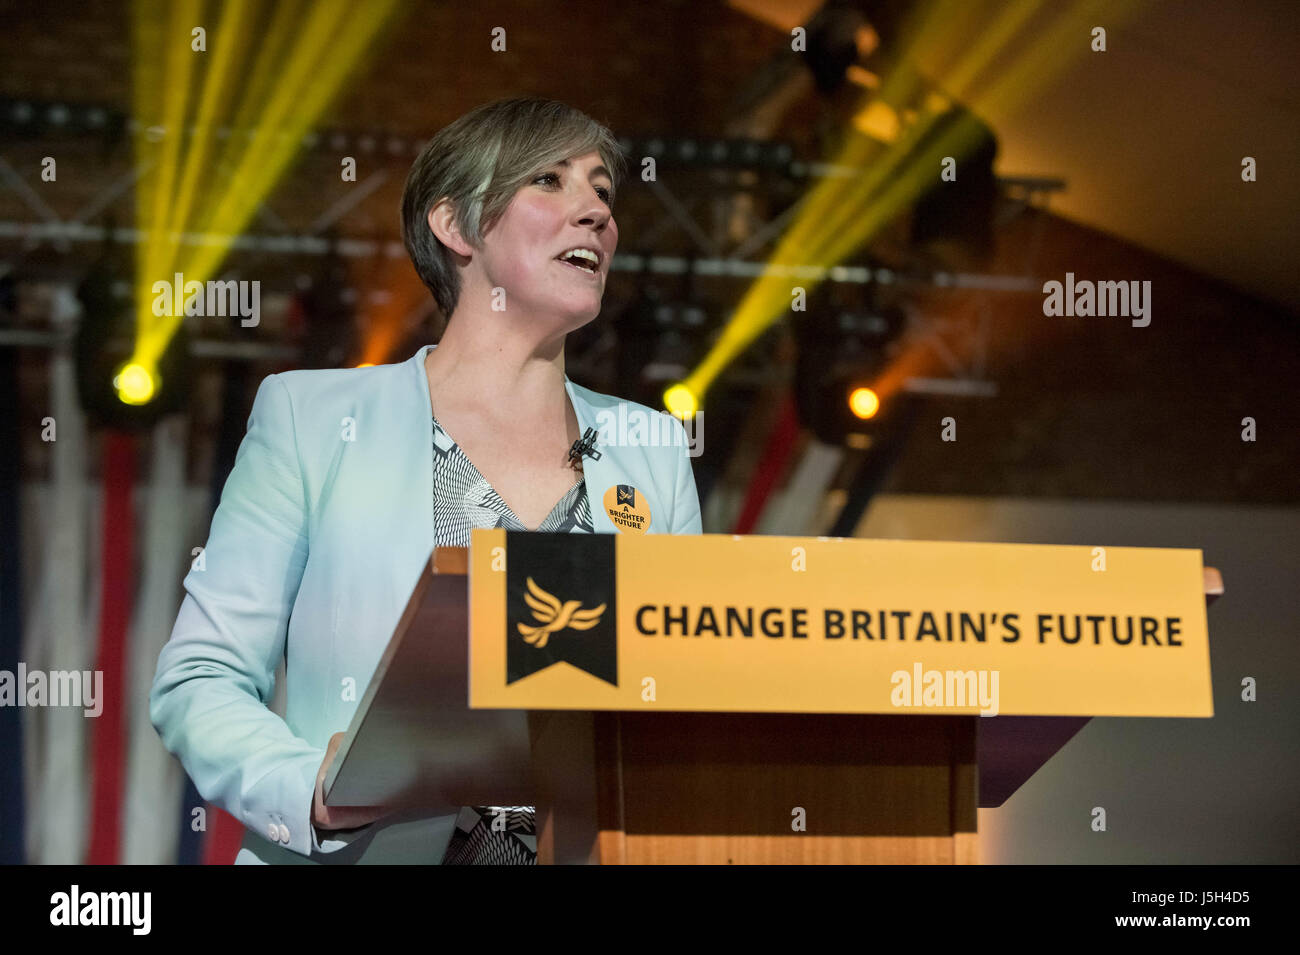 London, UK. 17th May, 2017. Daisy Cooper, Liberal Democrat shadow minister for young people and candidate for St Albans, speaks just prior to the Lib Dem general election manifesto launch © Guy Corbishley/Alamy Live News Stock Photo